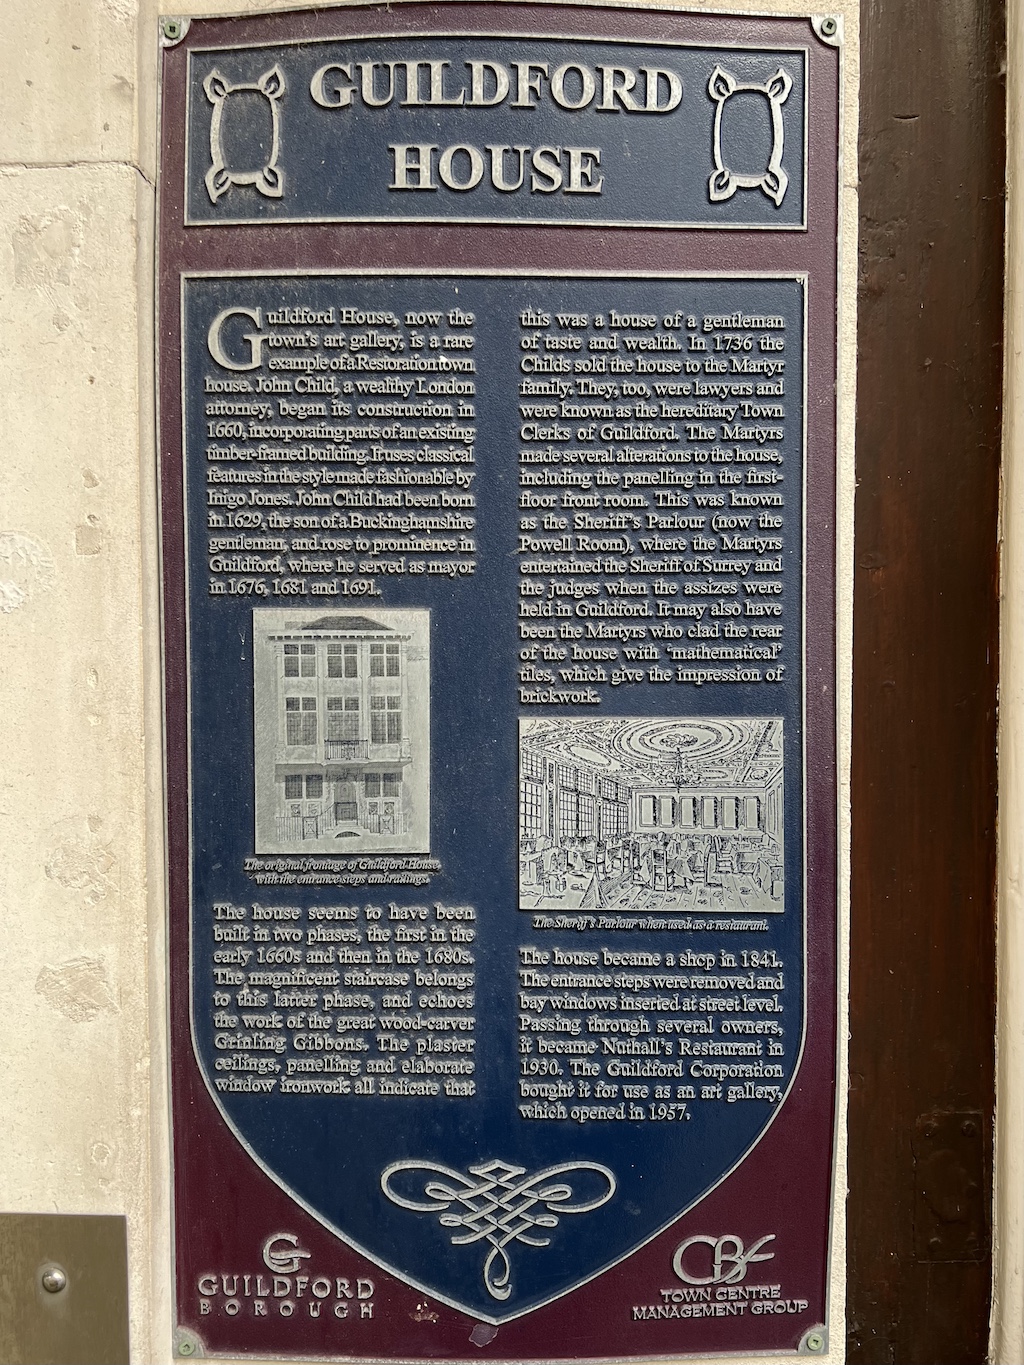 Blue plaque in Guildford for Guildford House